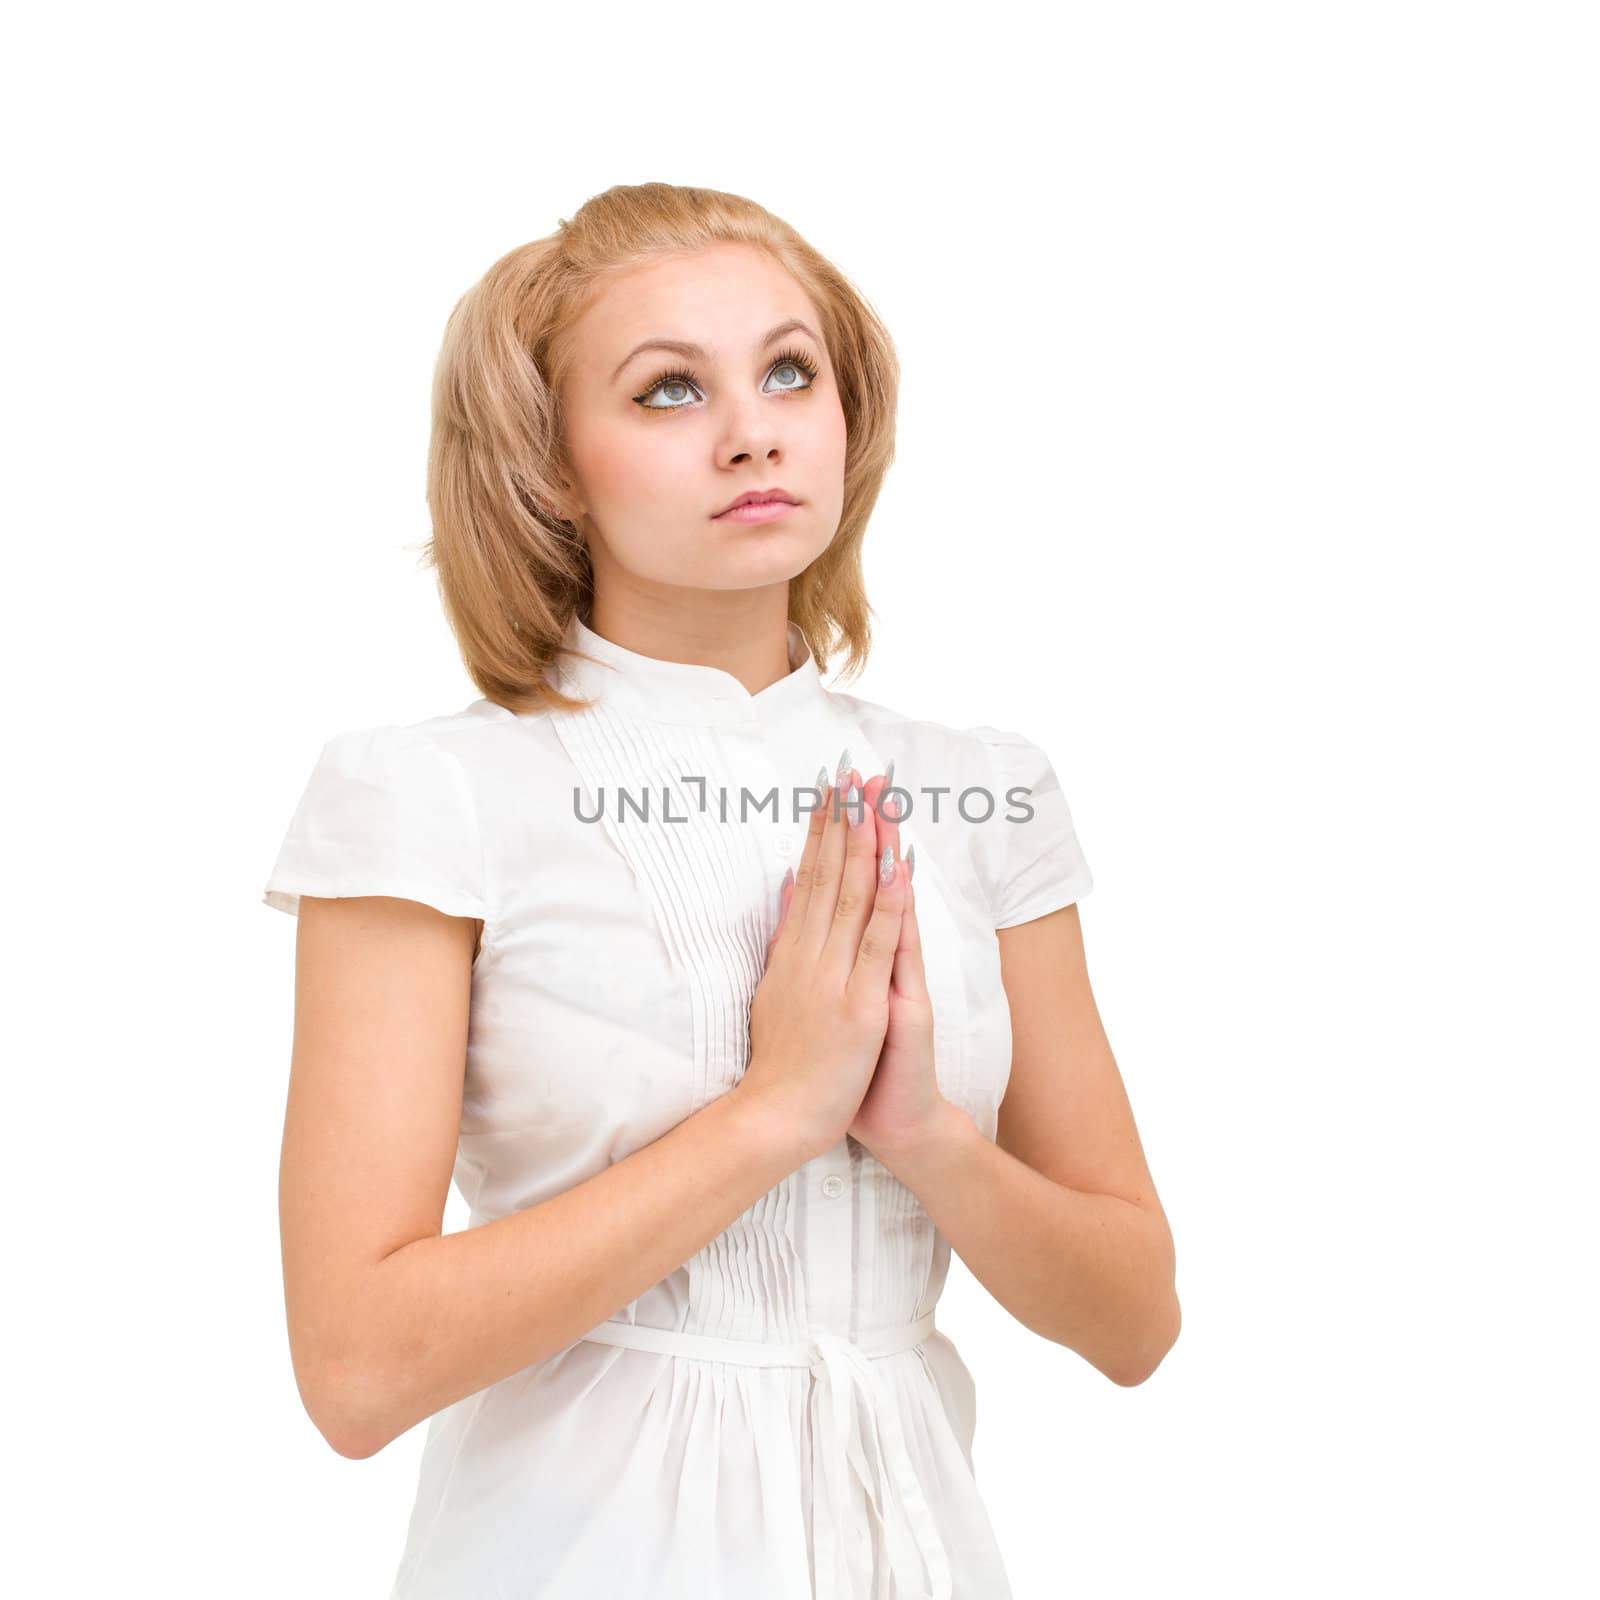 modest young woman praying, isolated on white background